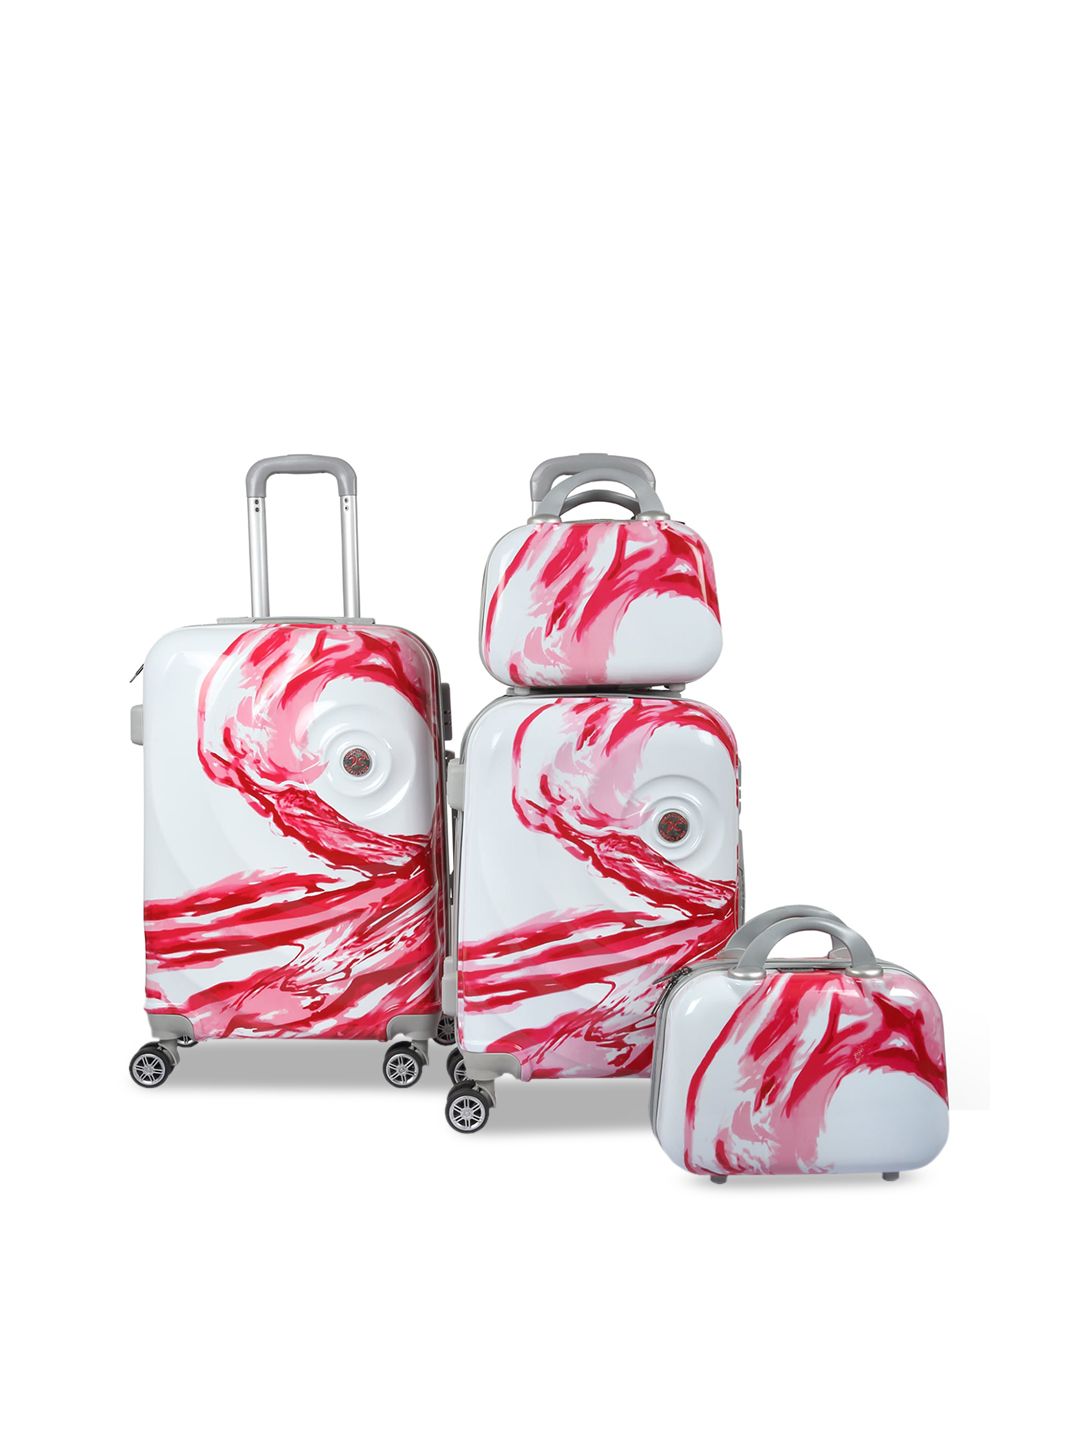 Polo Class Red & White Printed Set of 4 Travelling Bag Price in India